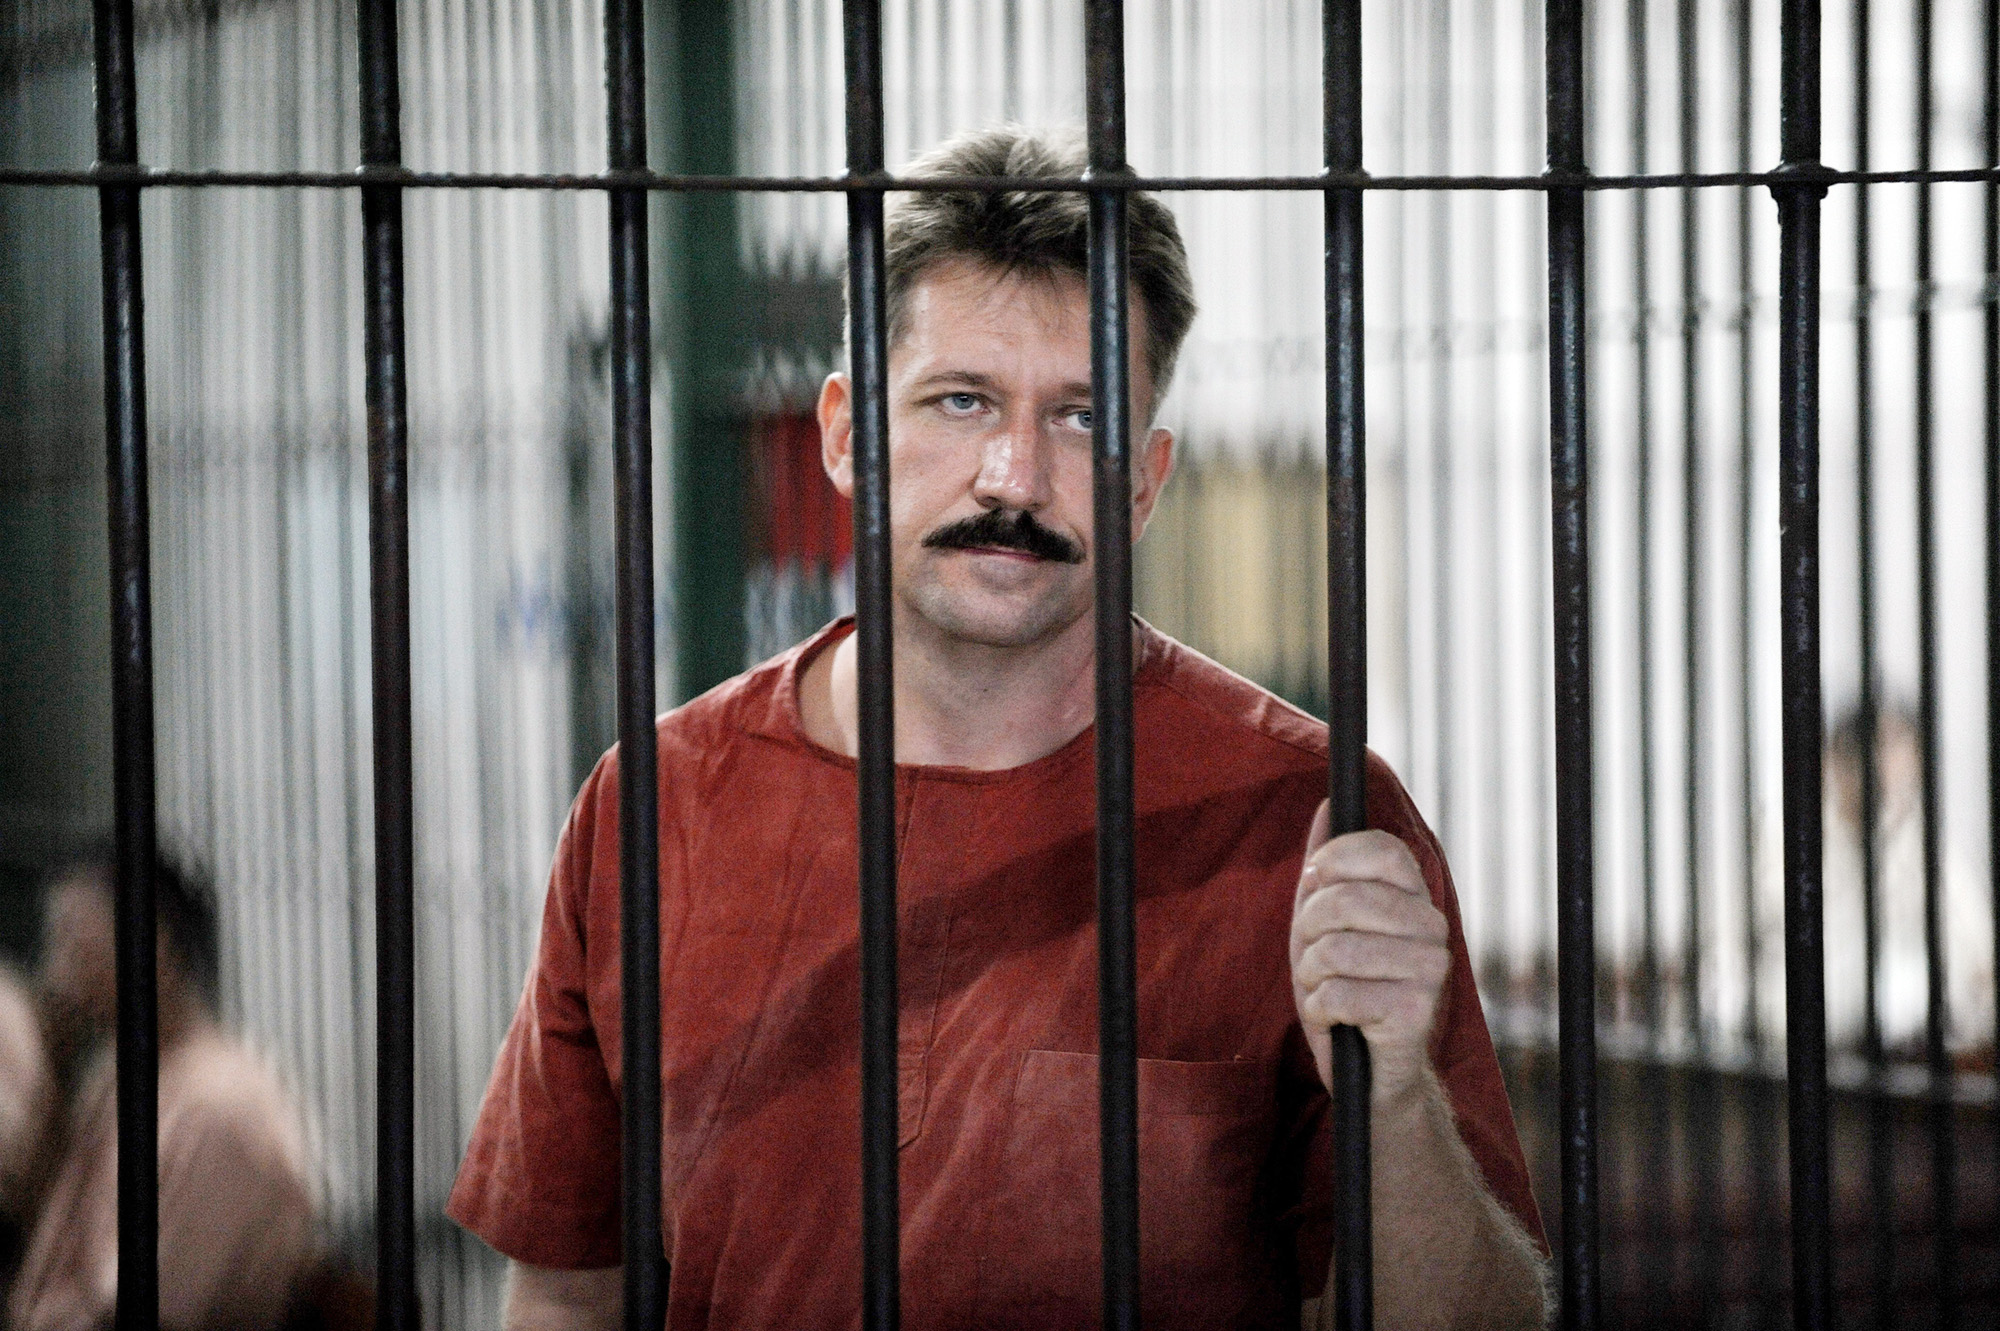 Russian arm dealer Viktor Bout looks from behind bars at the Criminal Court in Bangkok, Thailand, on October 10, 2008. 